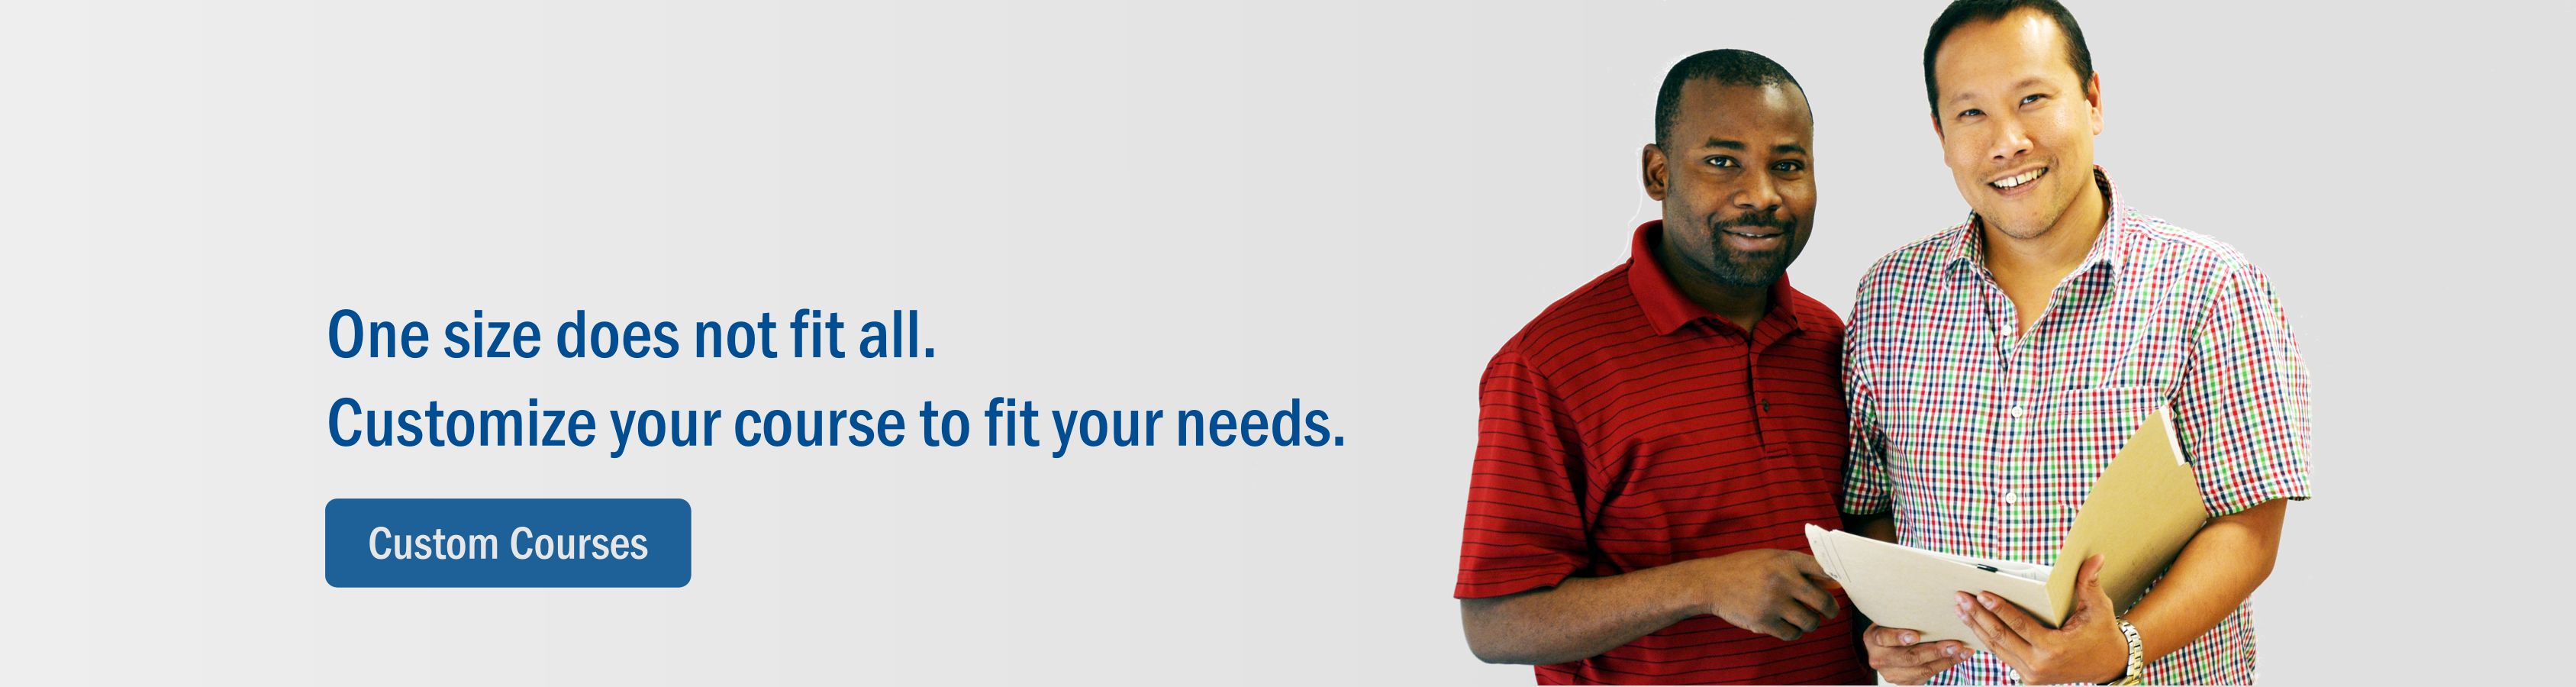 One size does not fit all. Customize your course to fit your needs.